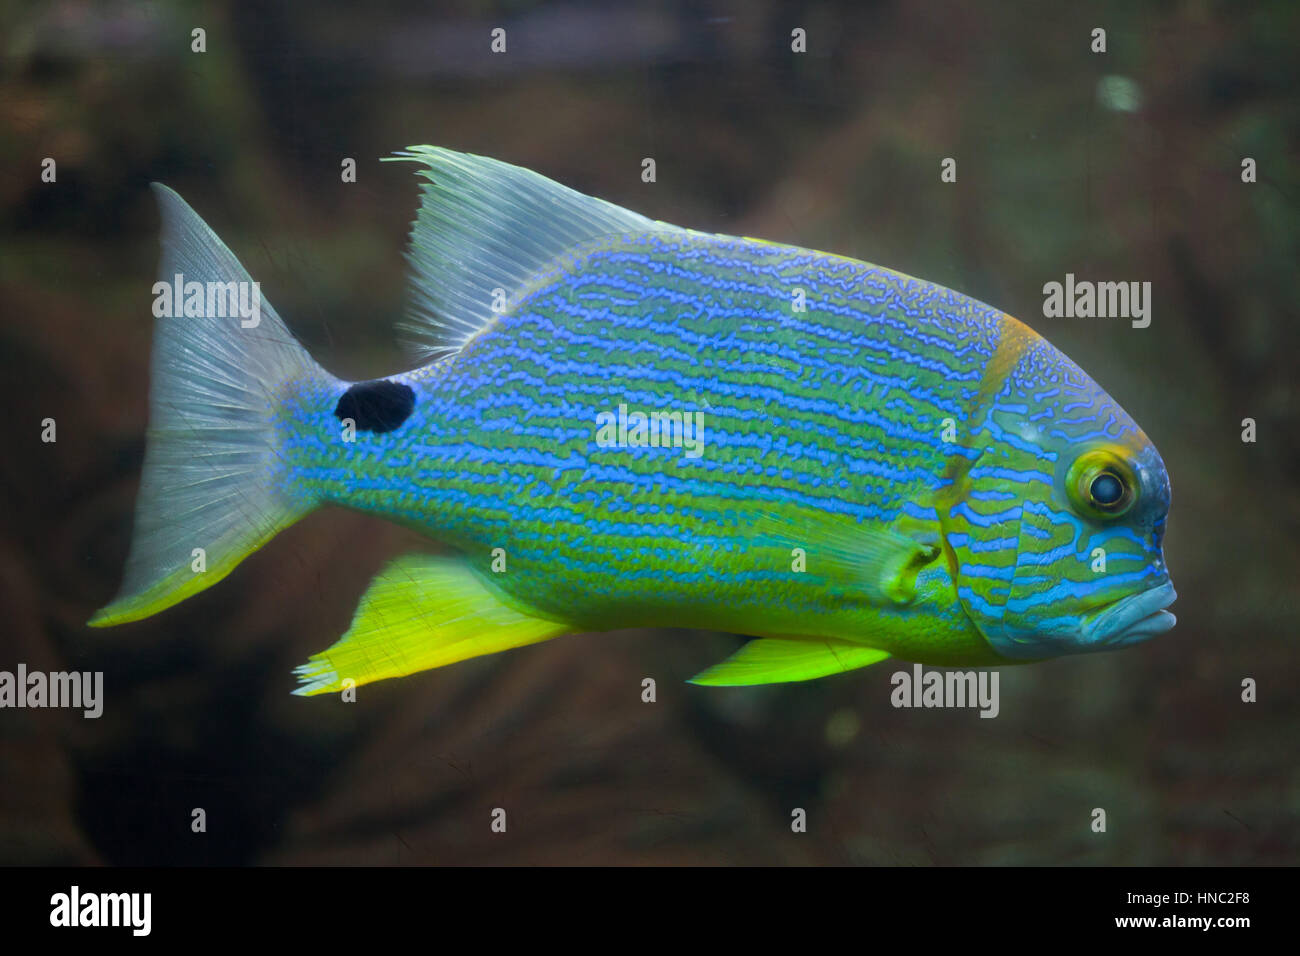 Sailfin snapper (Symphorichthys spilurus), also known as the blue-lined sea bream. Stock Photo